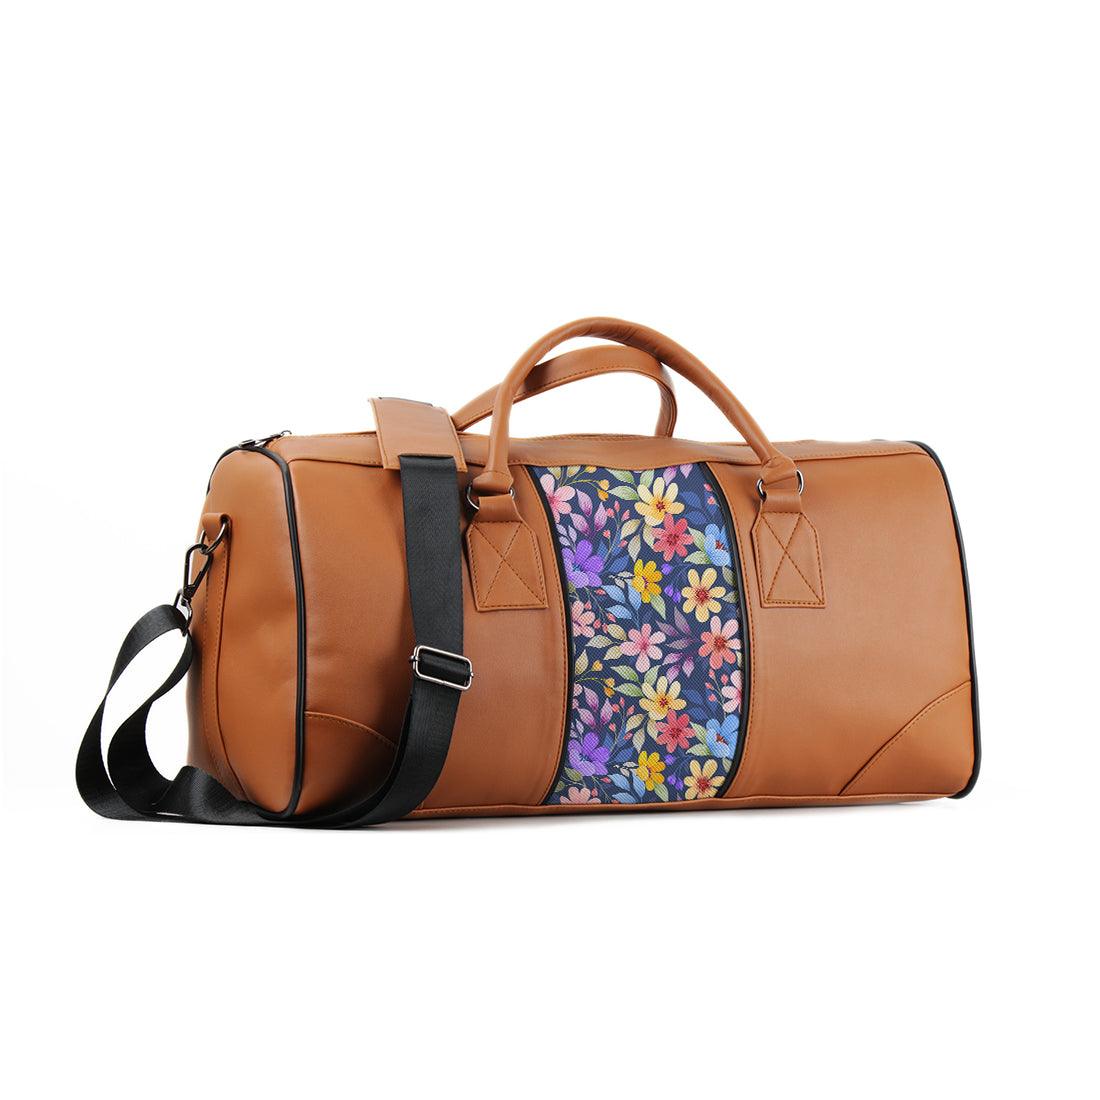 Mixed Duffel Bag Purple Floral - CANVAEGYPT